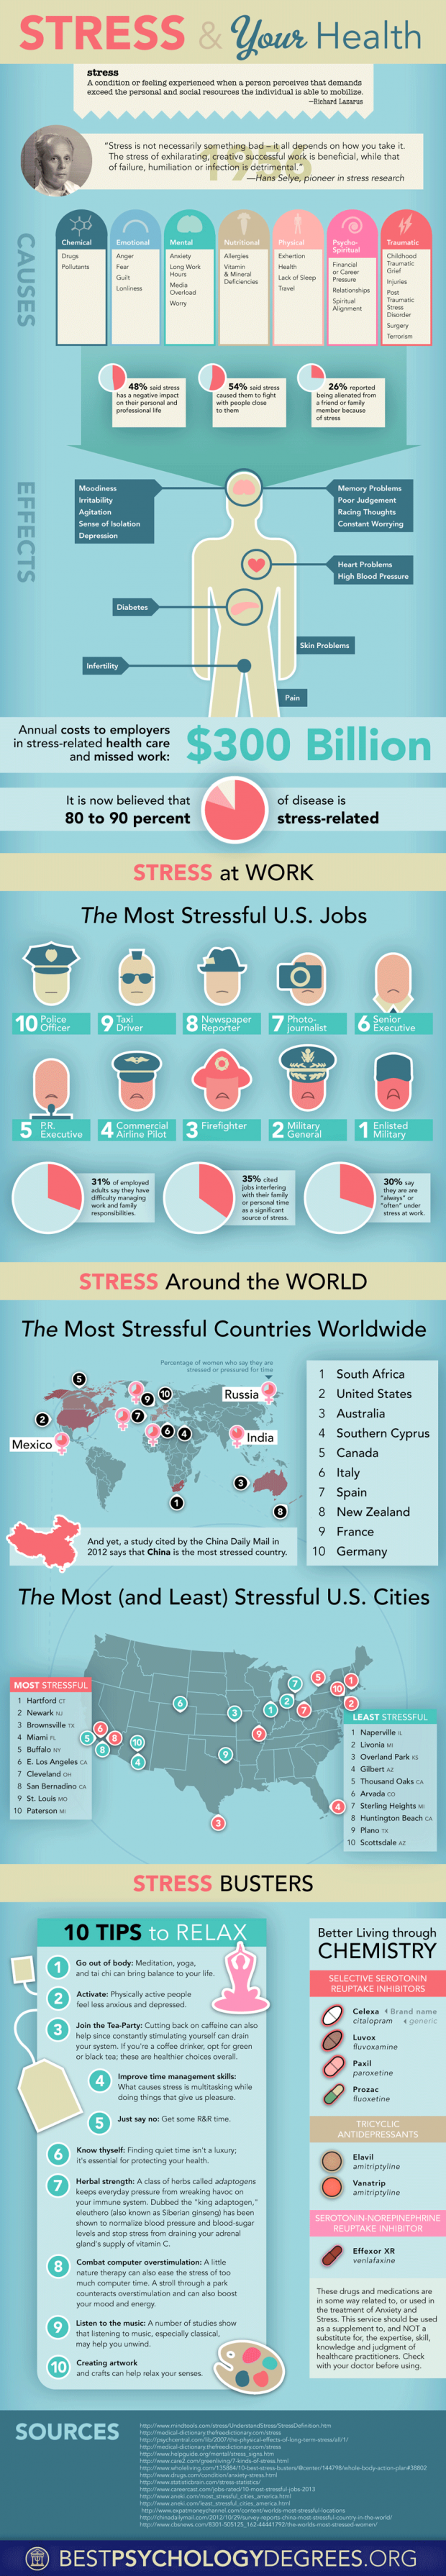 Stress and your Health #infographic